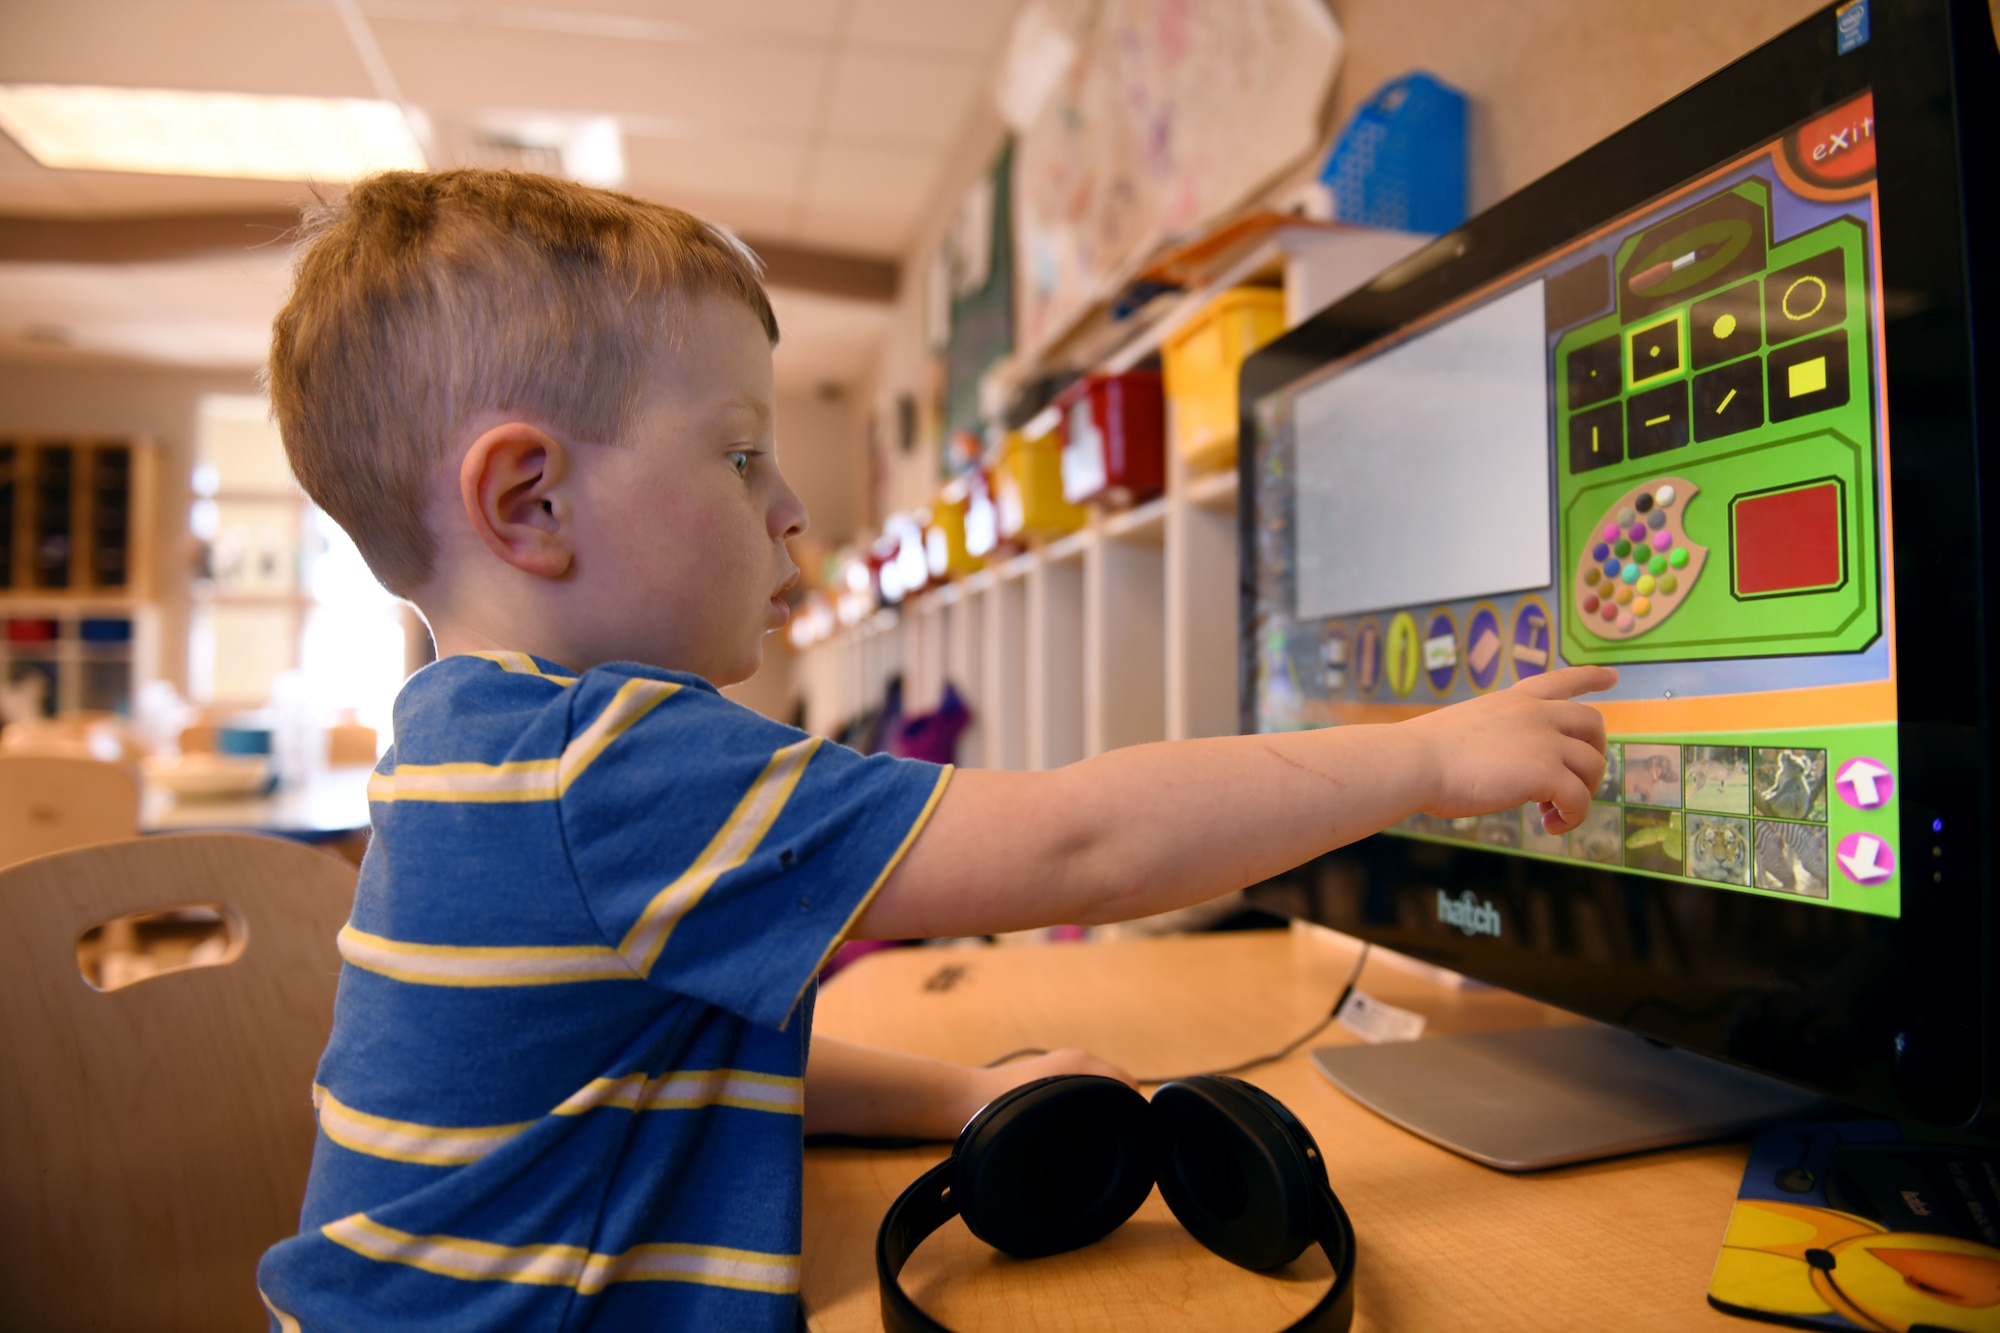 ylee Wilbur, son of Staff Sgts. Chaelynne and Brandon Wilbur, uses a Hatch Early Learning computer to learn his colors in room 135, at the McRaven Child Development Center on Ellsworth Air Force Base, S.D., March 19, 2019. The Early Learning Matters curriculum will be incorporated at all Department of Defense CDC’s in the coming months. Chaelynne is a 28th Maintenance Squadron crew chief and Brandon is a 28th Munitions Squadron crew chief.